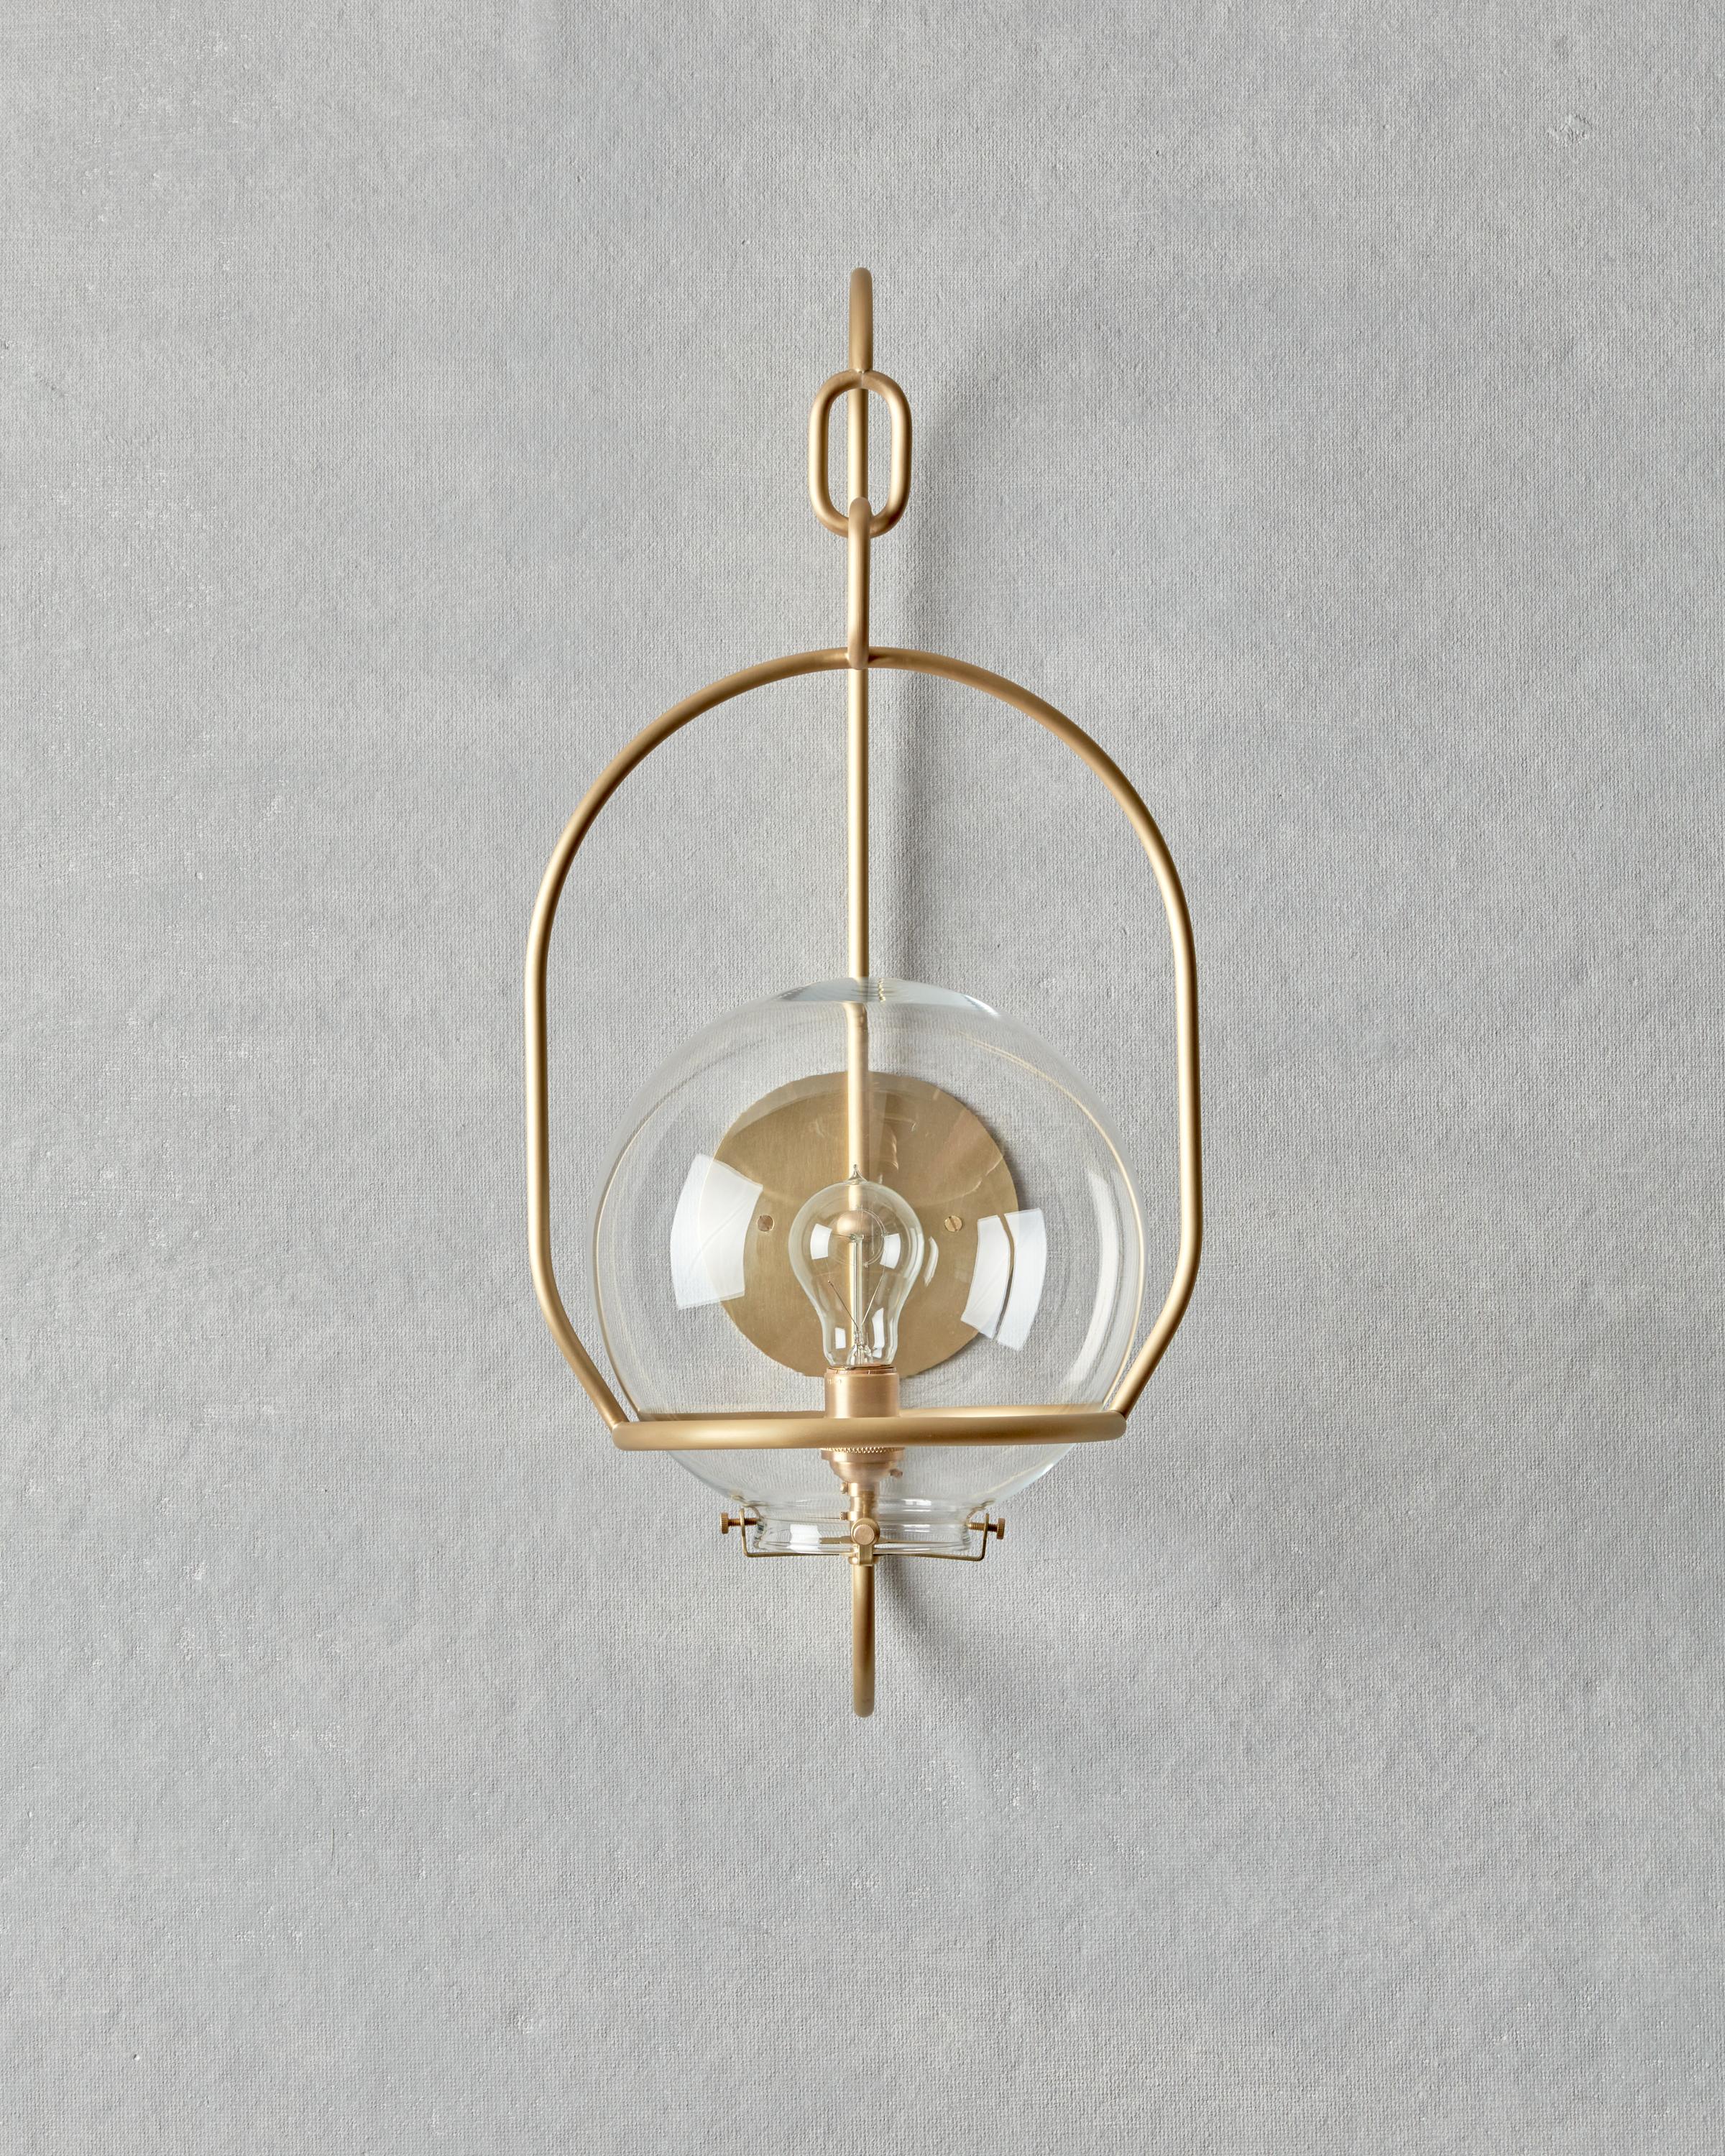 American Satin Brass Emil Lantern - Large - Outdoor Use For Sale